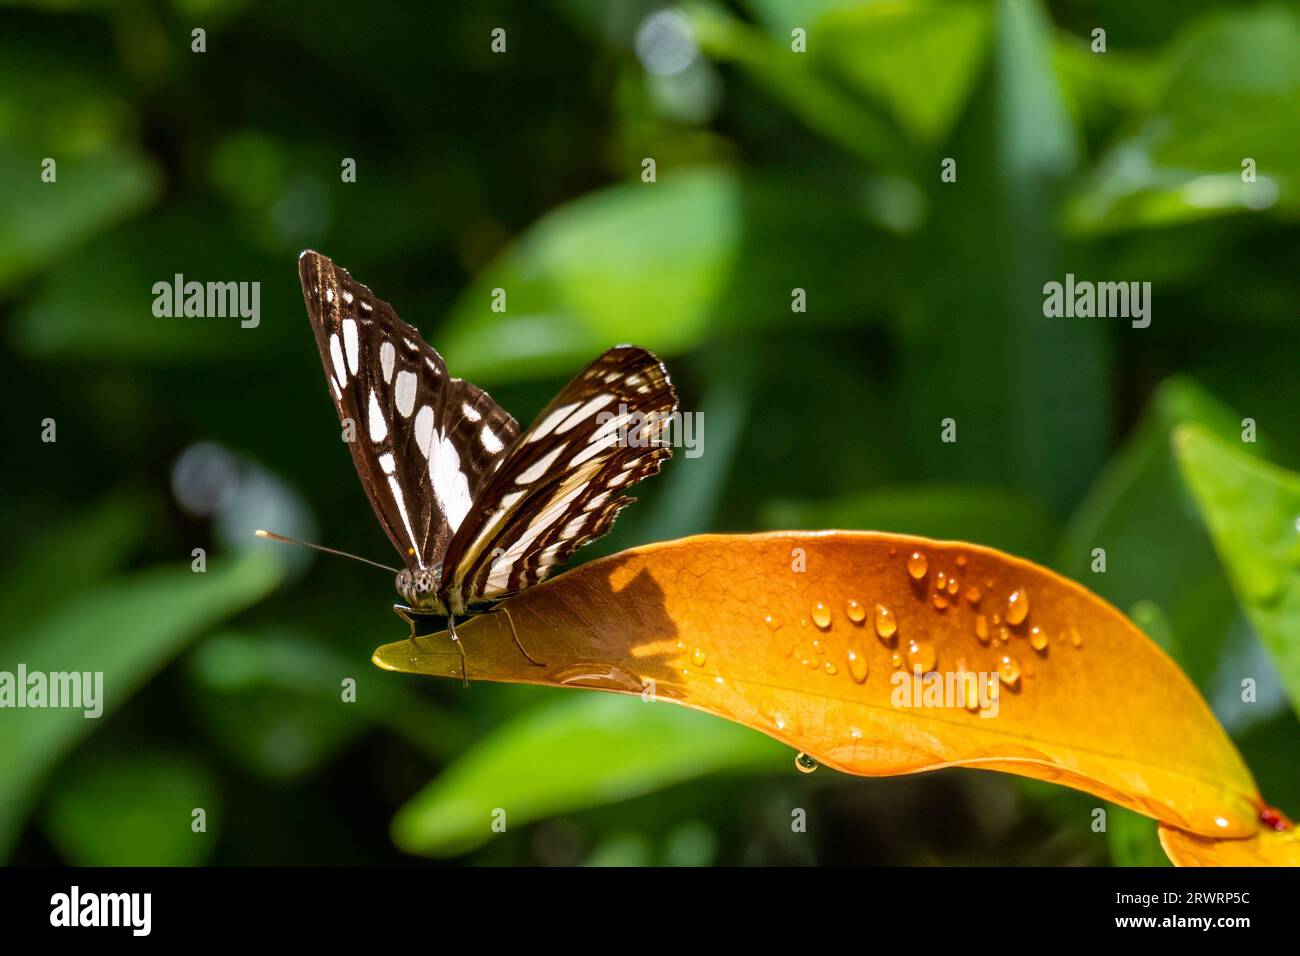 A close-up of a common sailor (Neptis hylas) butterfly perched atop a leaf Stock Photo